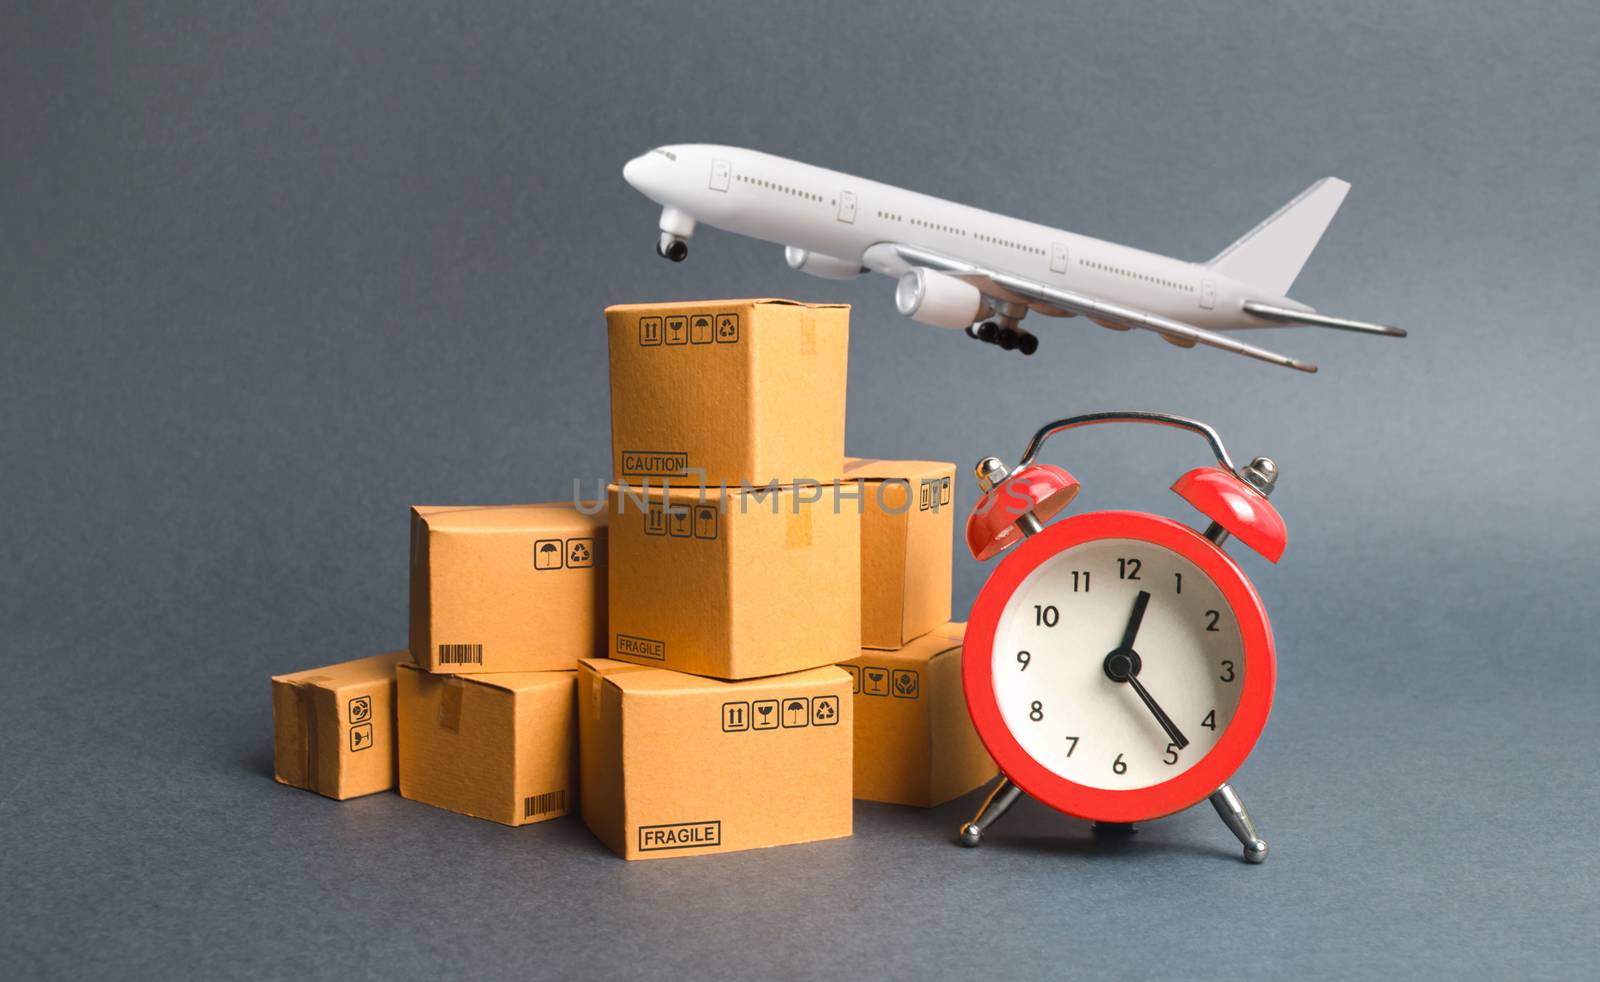 Cargo plane, stack of cardboard boxes and a red alarm clock. Express air delivery concept. Temporary storage, limited offer and discount. Optimization of logistics, improving efficiency